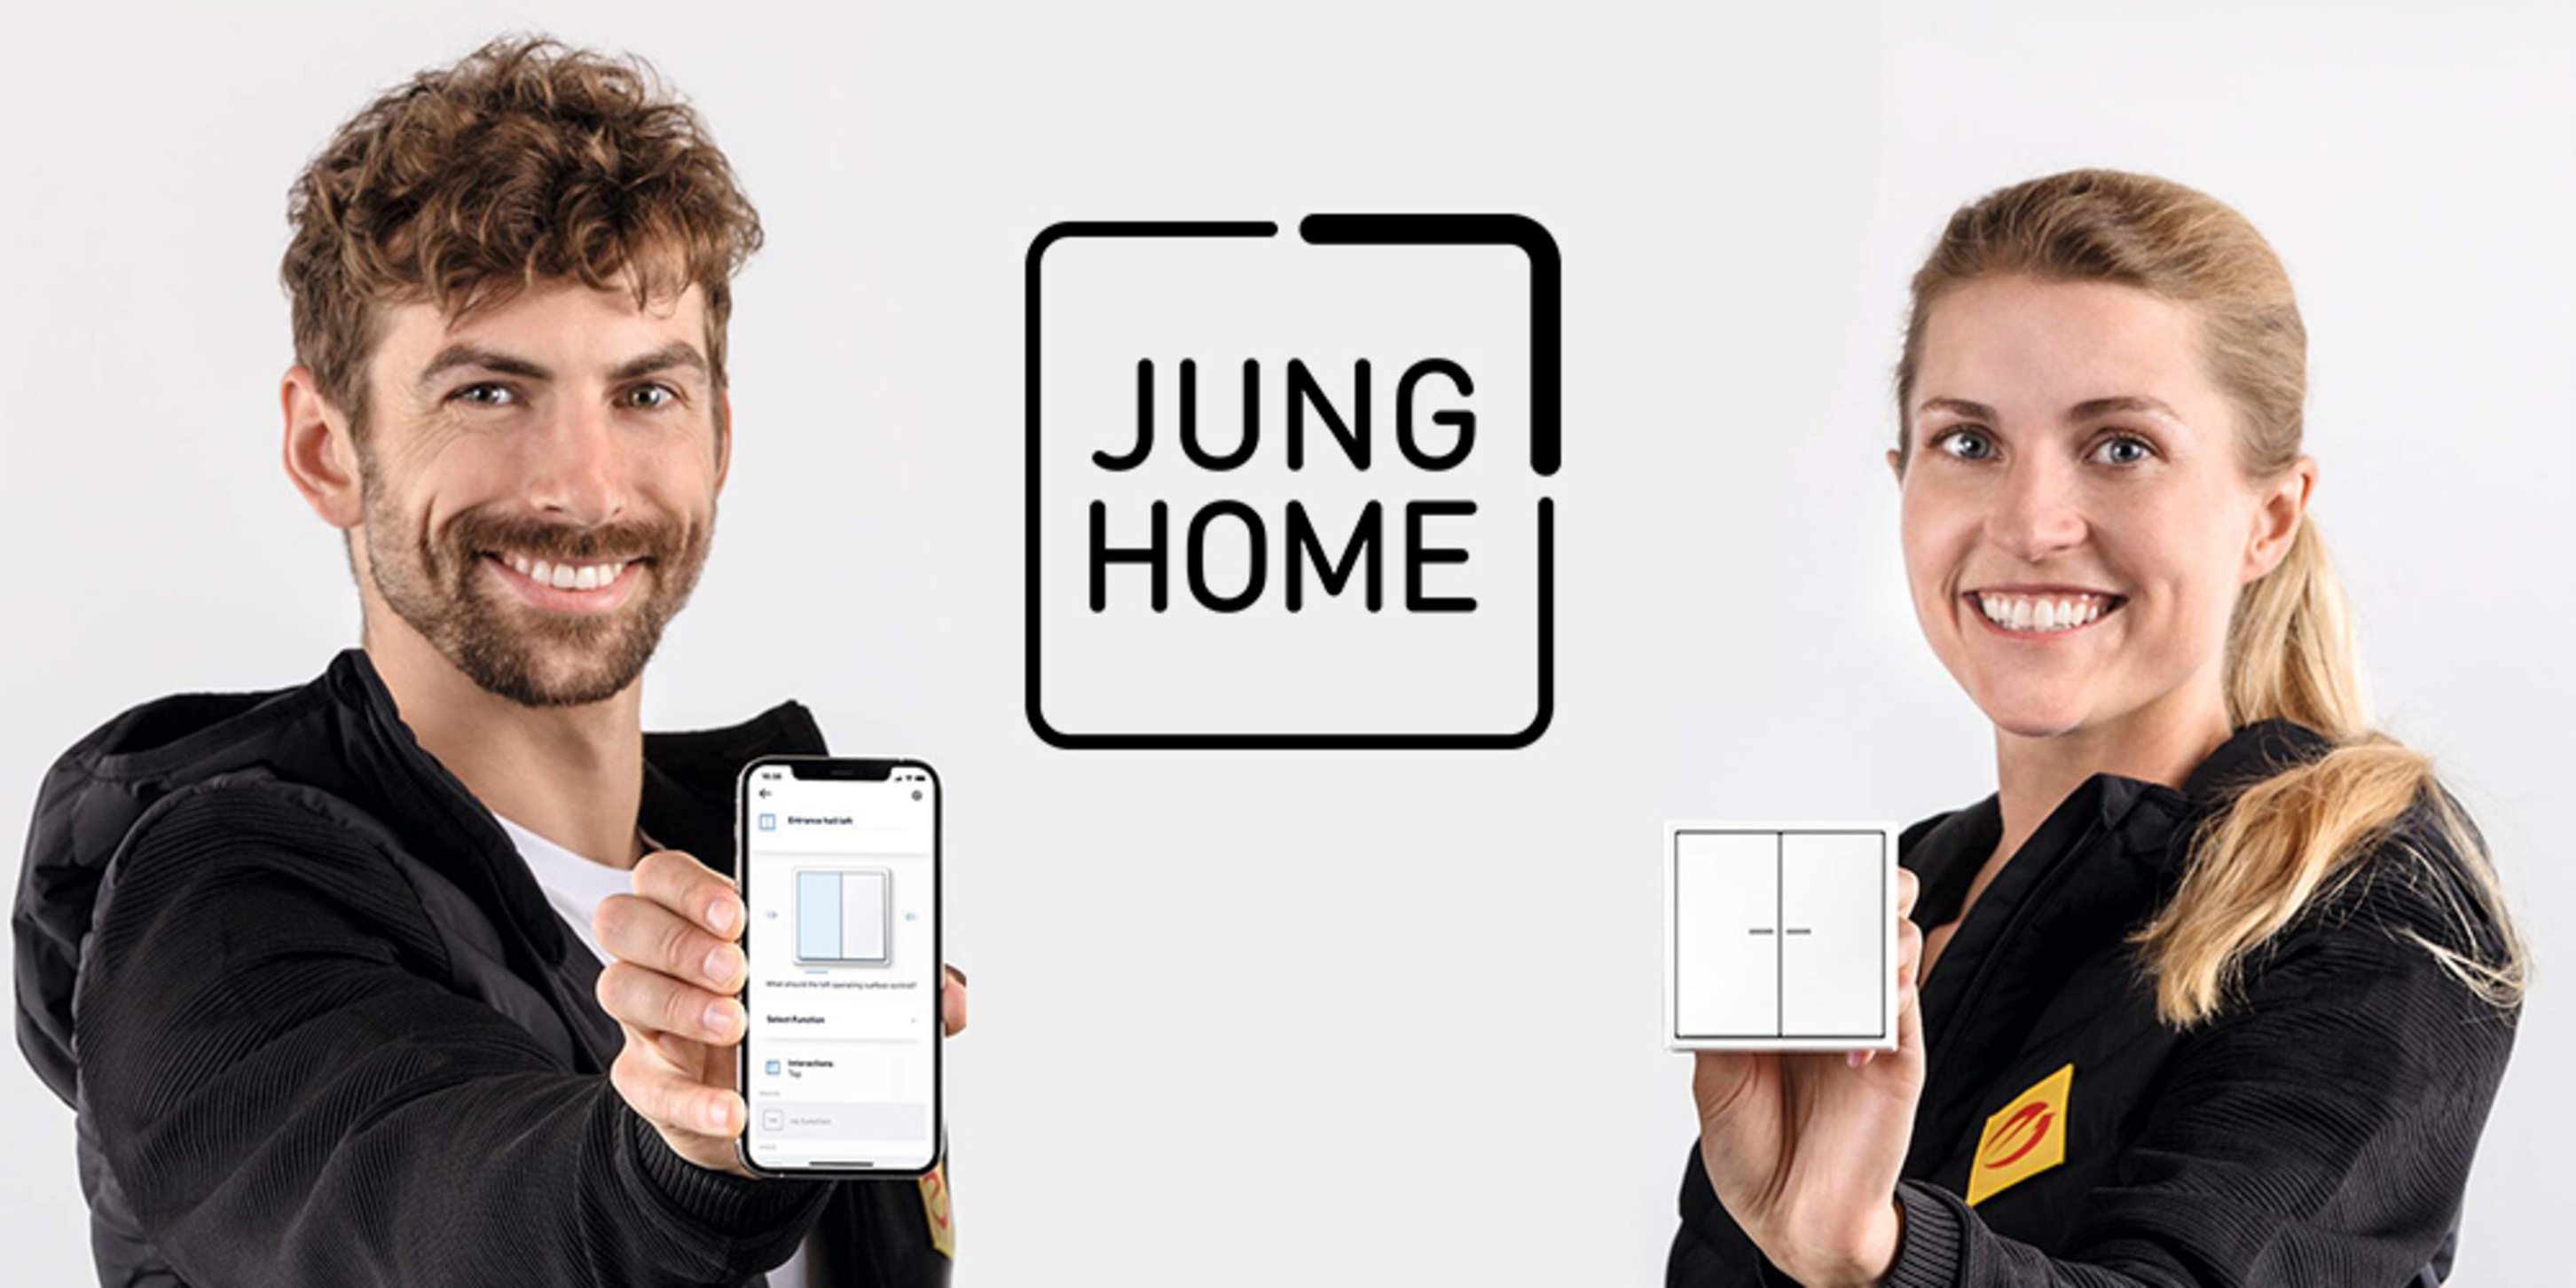 JUNG HOME bei Elektro Katers Installations GmbH in Dillingen